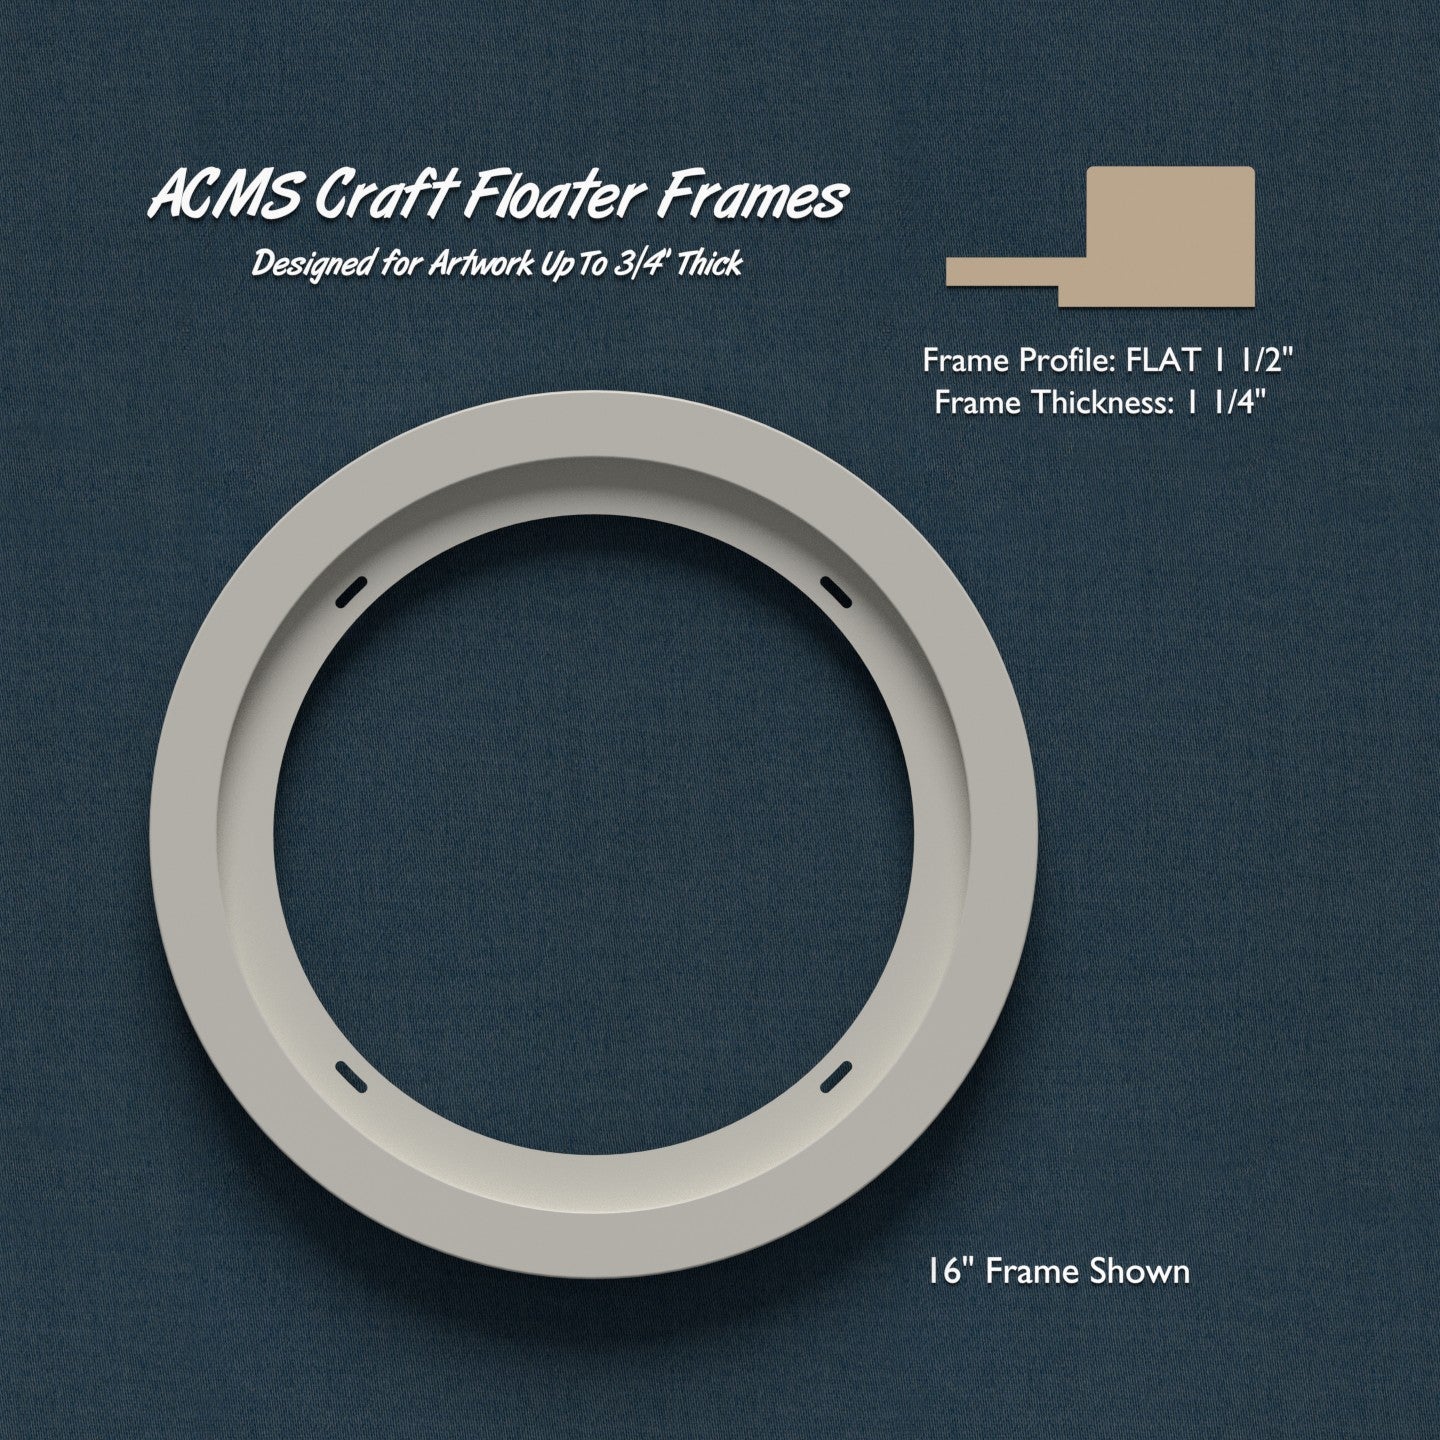 Round Craft Floater Frame - FLAT 1 1/2" Profile - 1 1/4" Thick